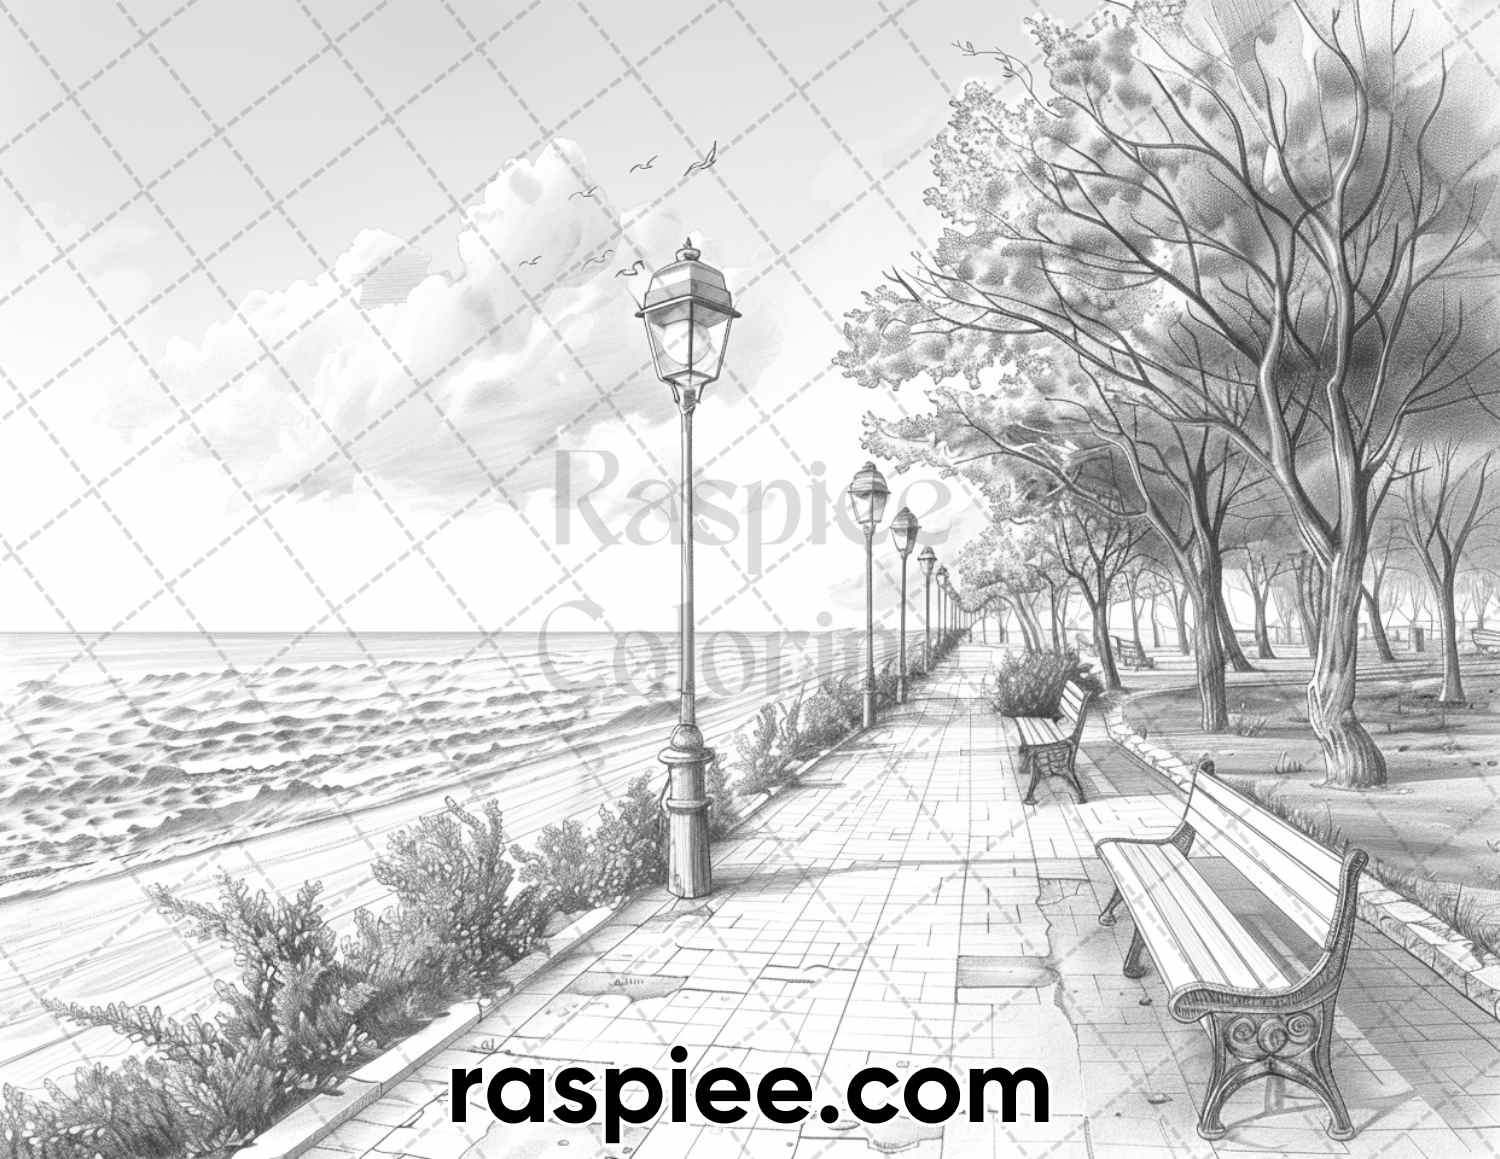 adult coloring pages, adult coloring sheets, adult coloring book pdf, adult coloring book printable, grayscale coloring pages, grayscale coloring books, landscapes coloring pages for adults, landscapes coloring book, grayscale illustration, summer adult coloring pages, summer coloring book, coastal landscapes adult coloring pages